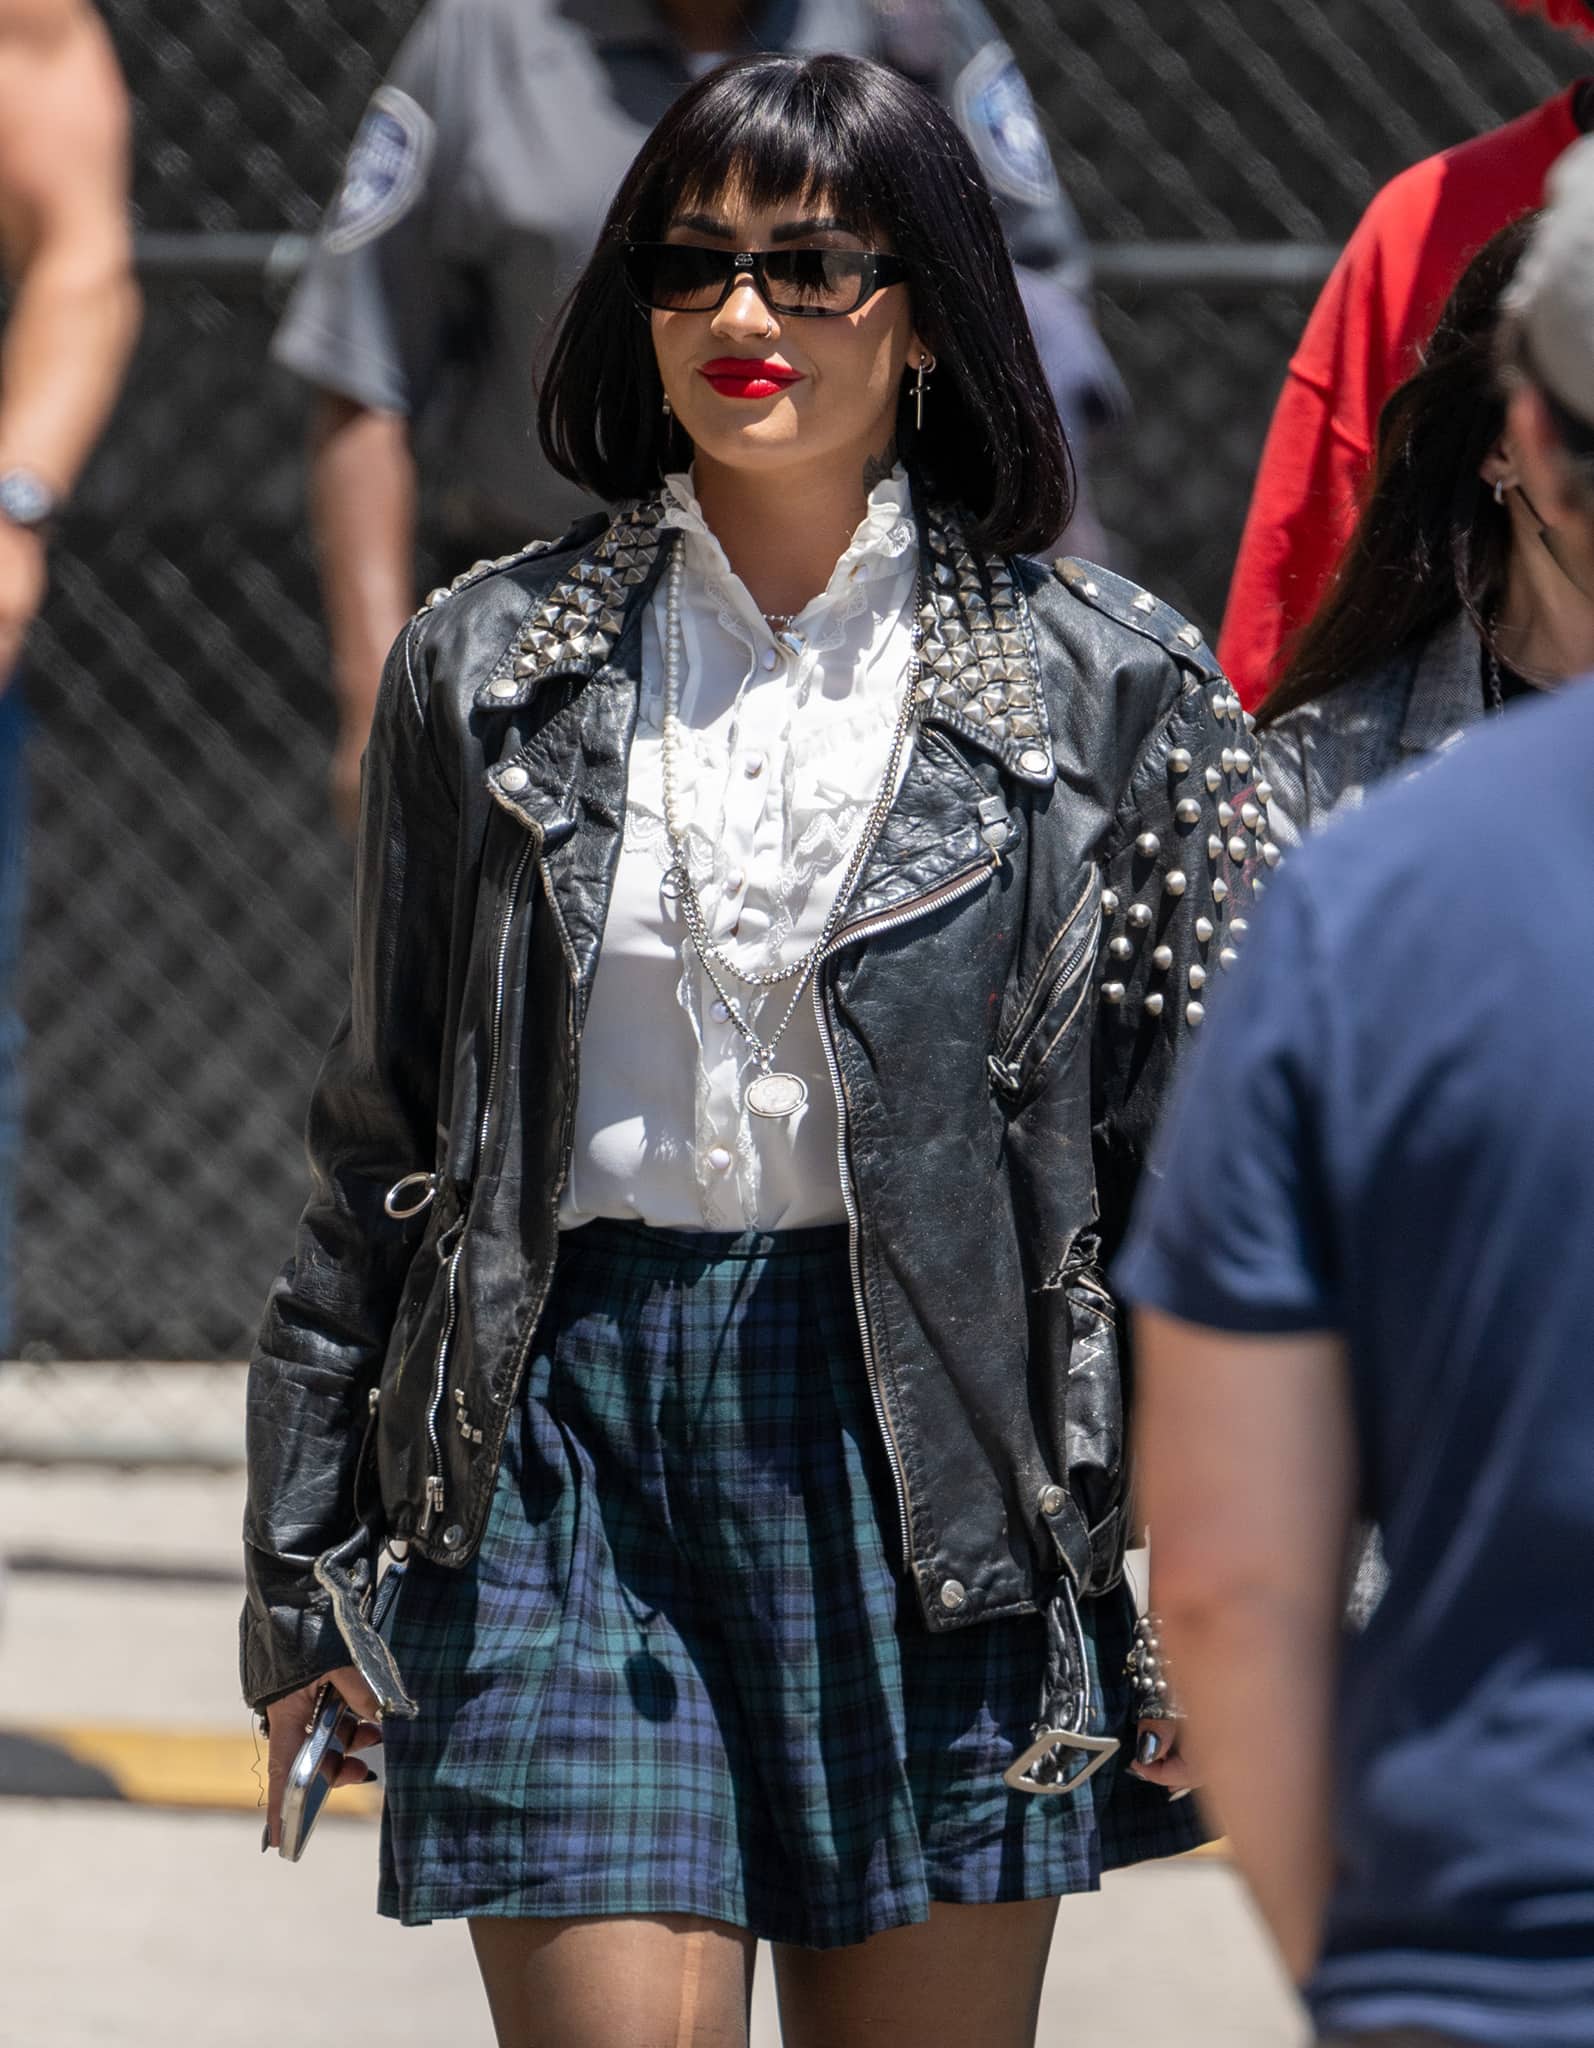 Demi Lovato styles her cool-grunge look with sunnies and long necklaces and wears a bold red lip color